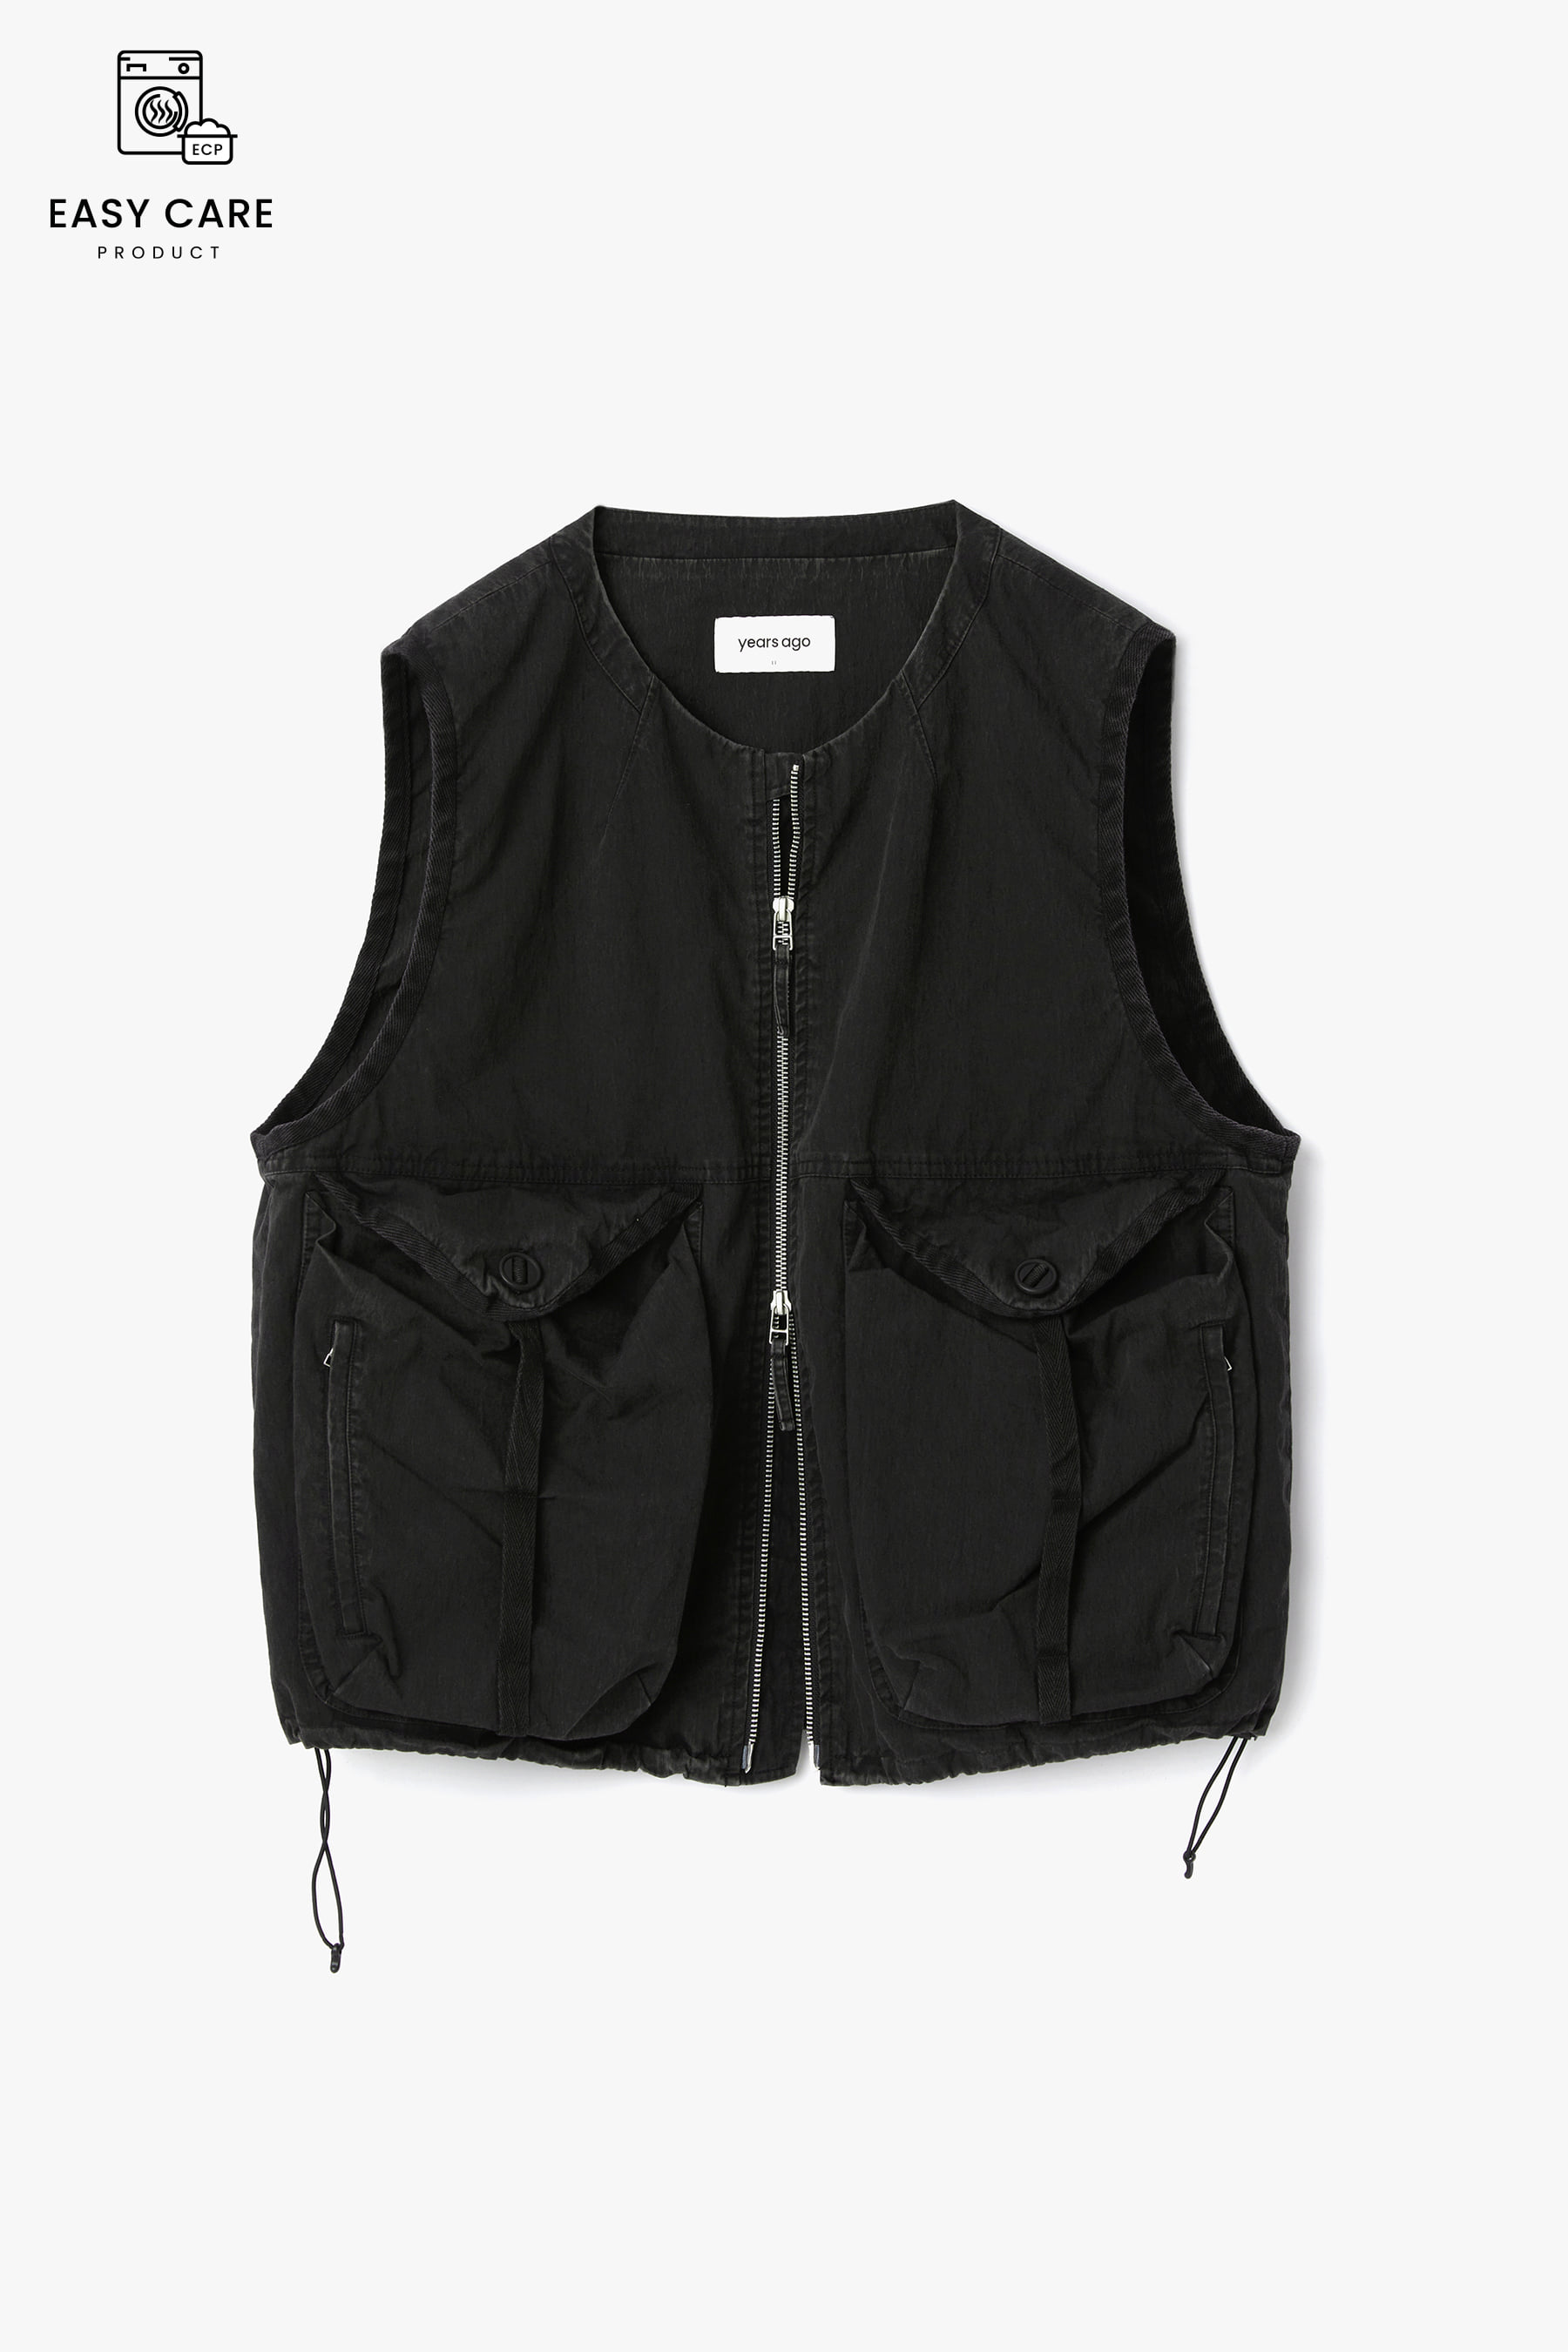 DUSTY BLACK OLD WASHED TACTICAL VEST (ECP GARMENT PROCESS)